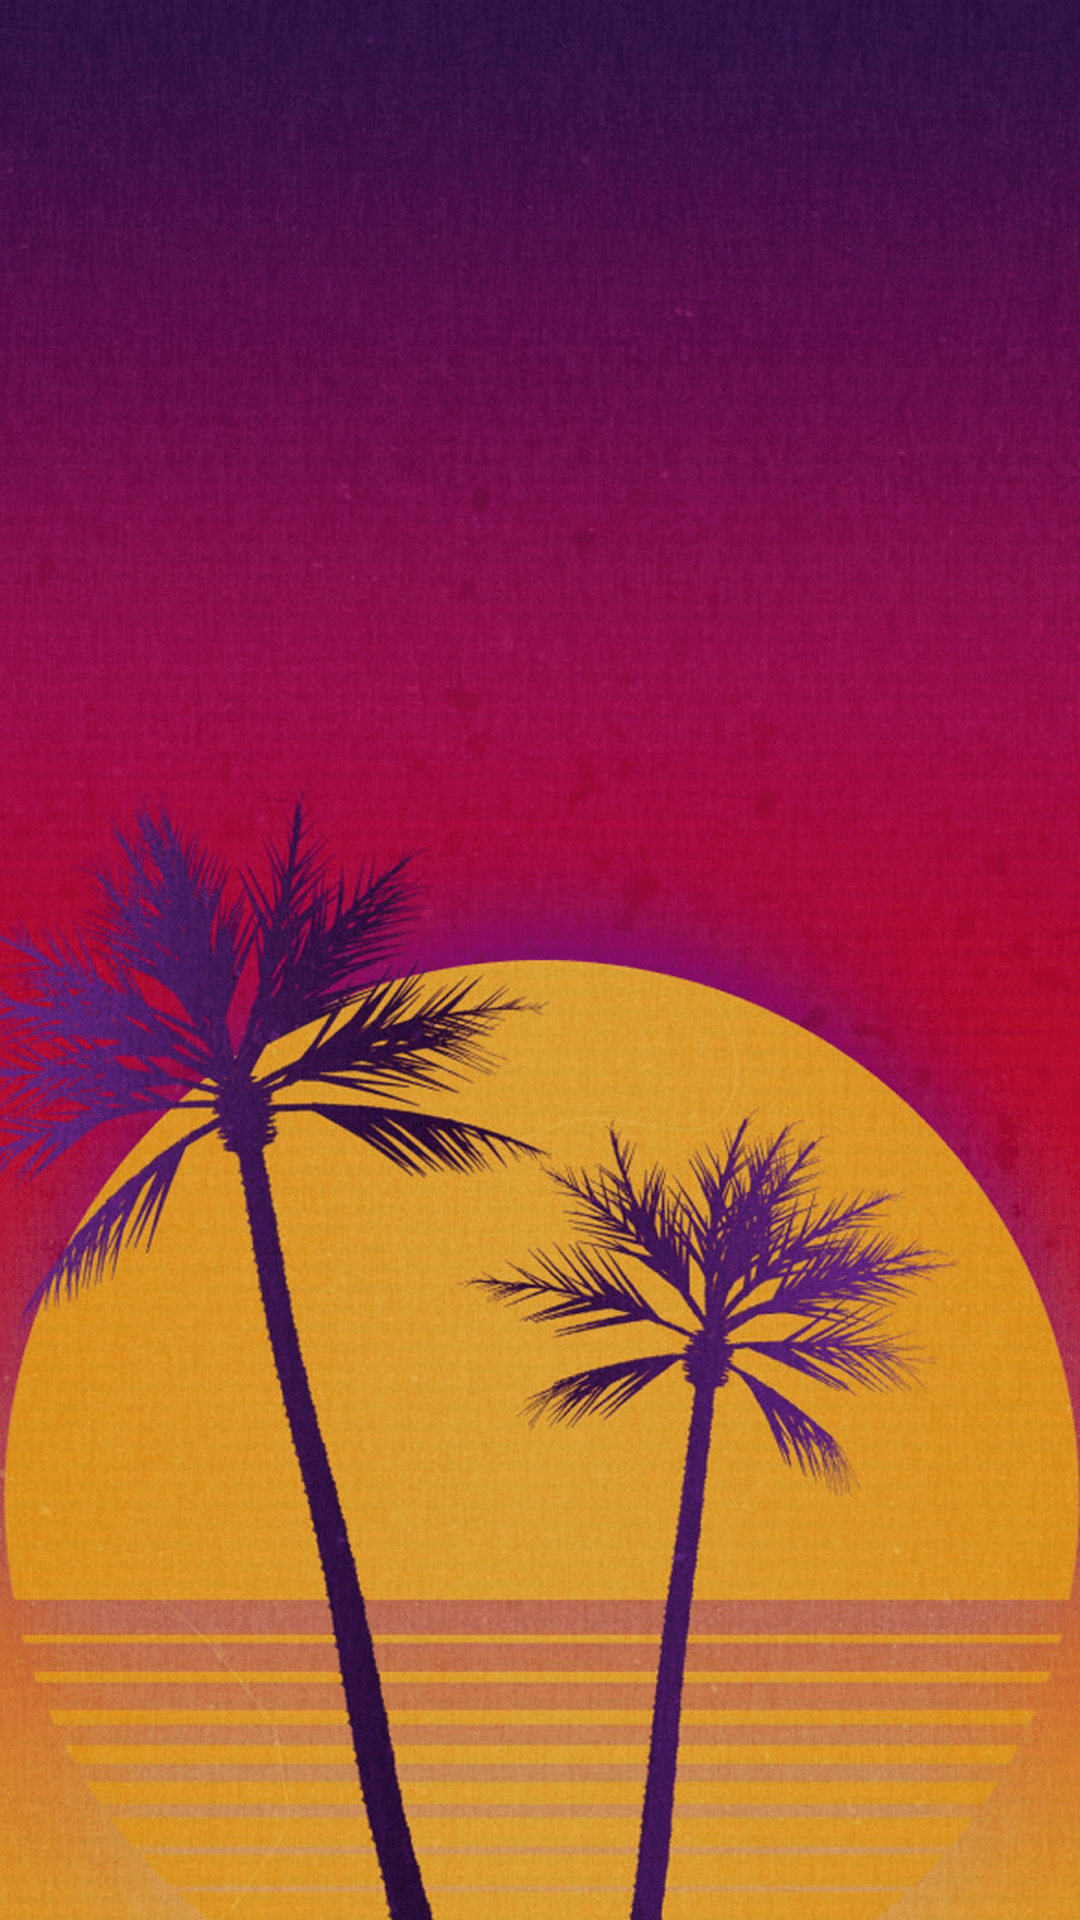 Aesthetic Palm Tree Wallpapers